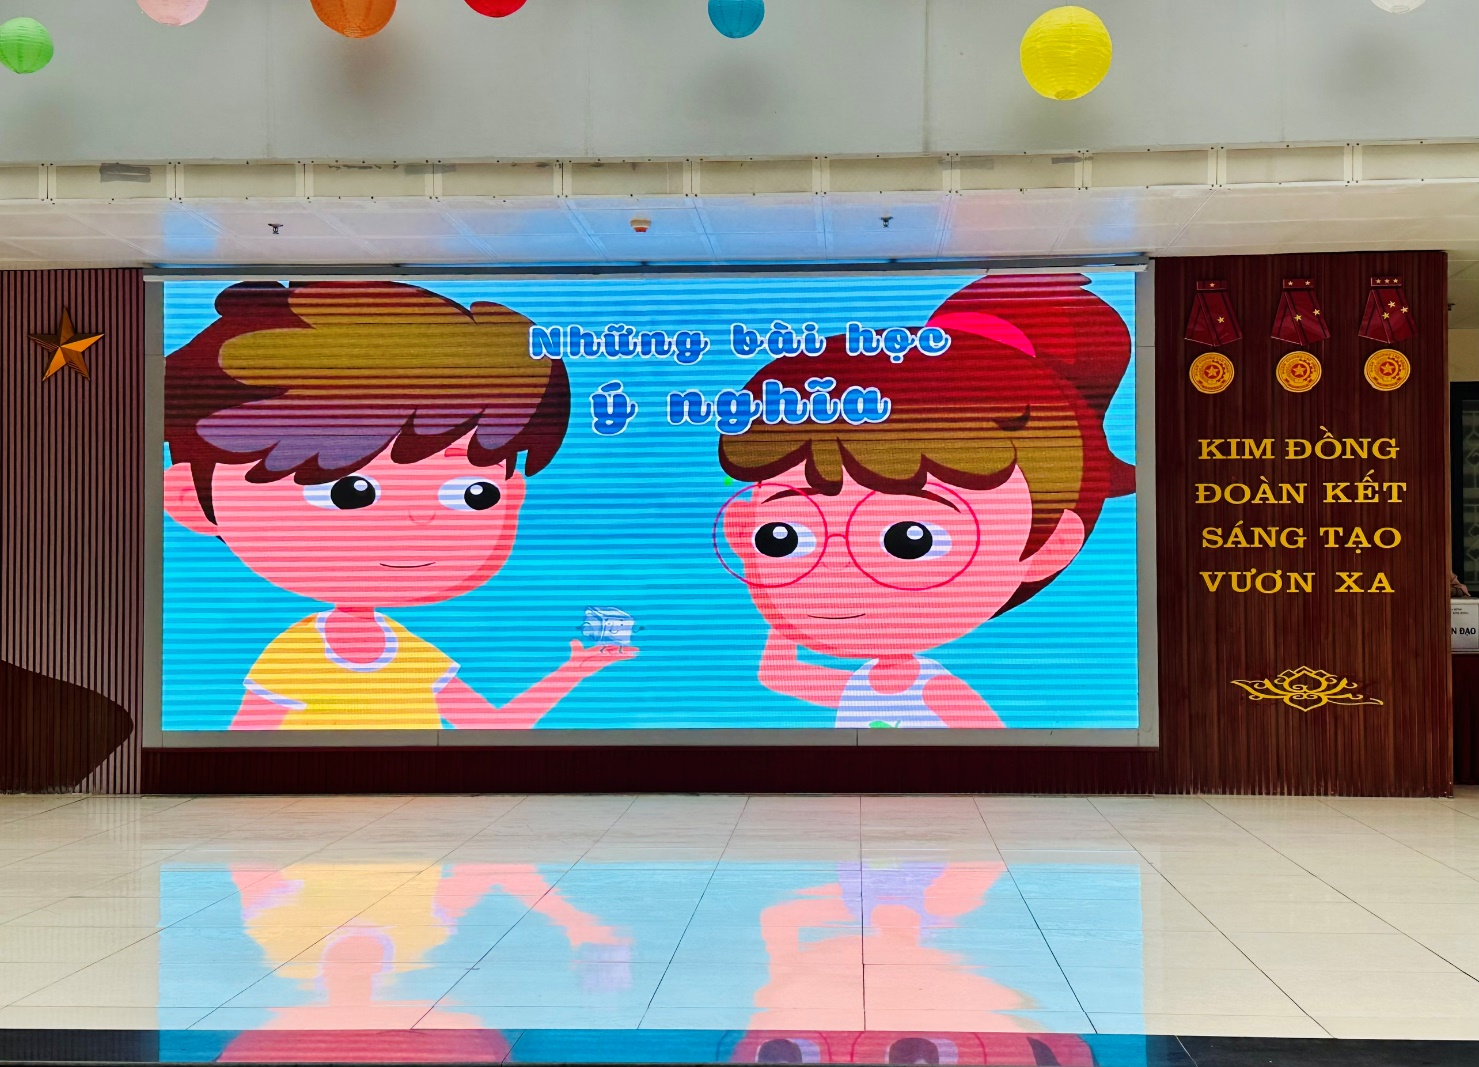 A large screen with cartoon characters on it

Description automatically generated